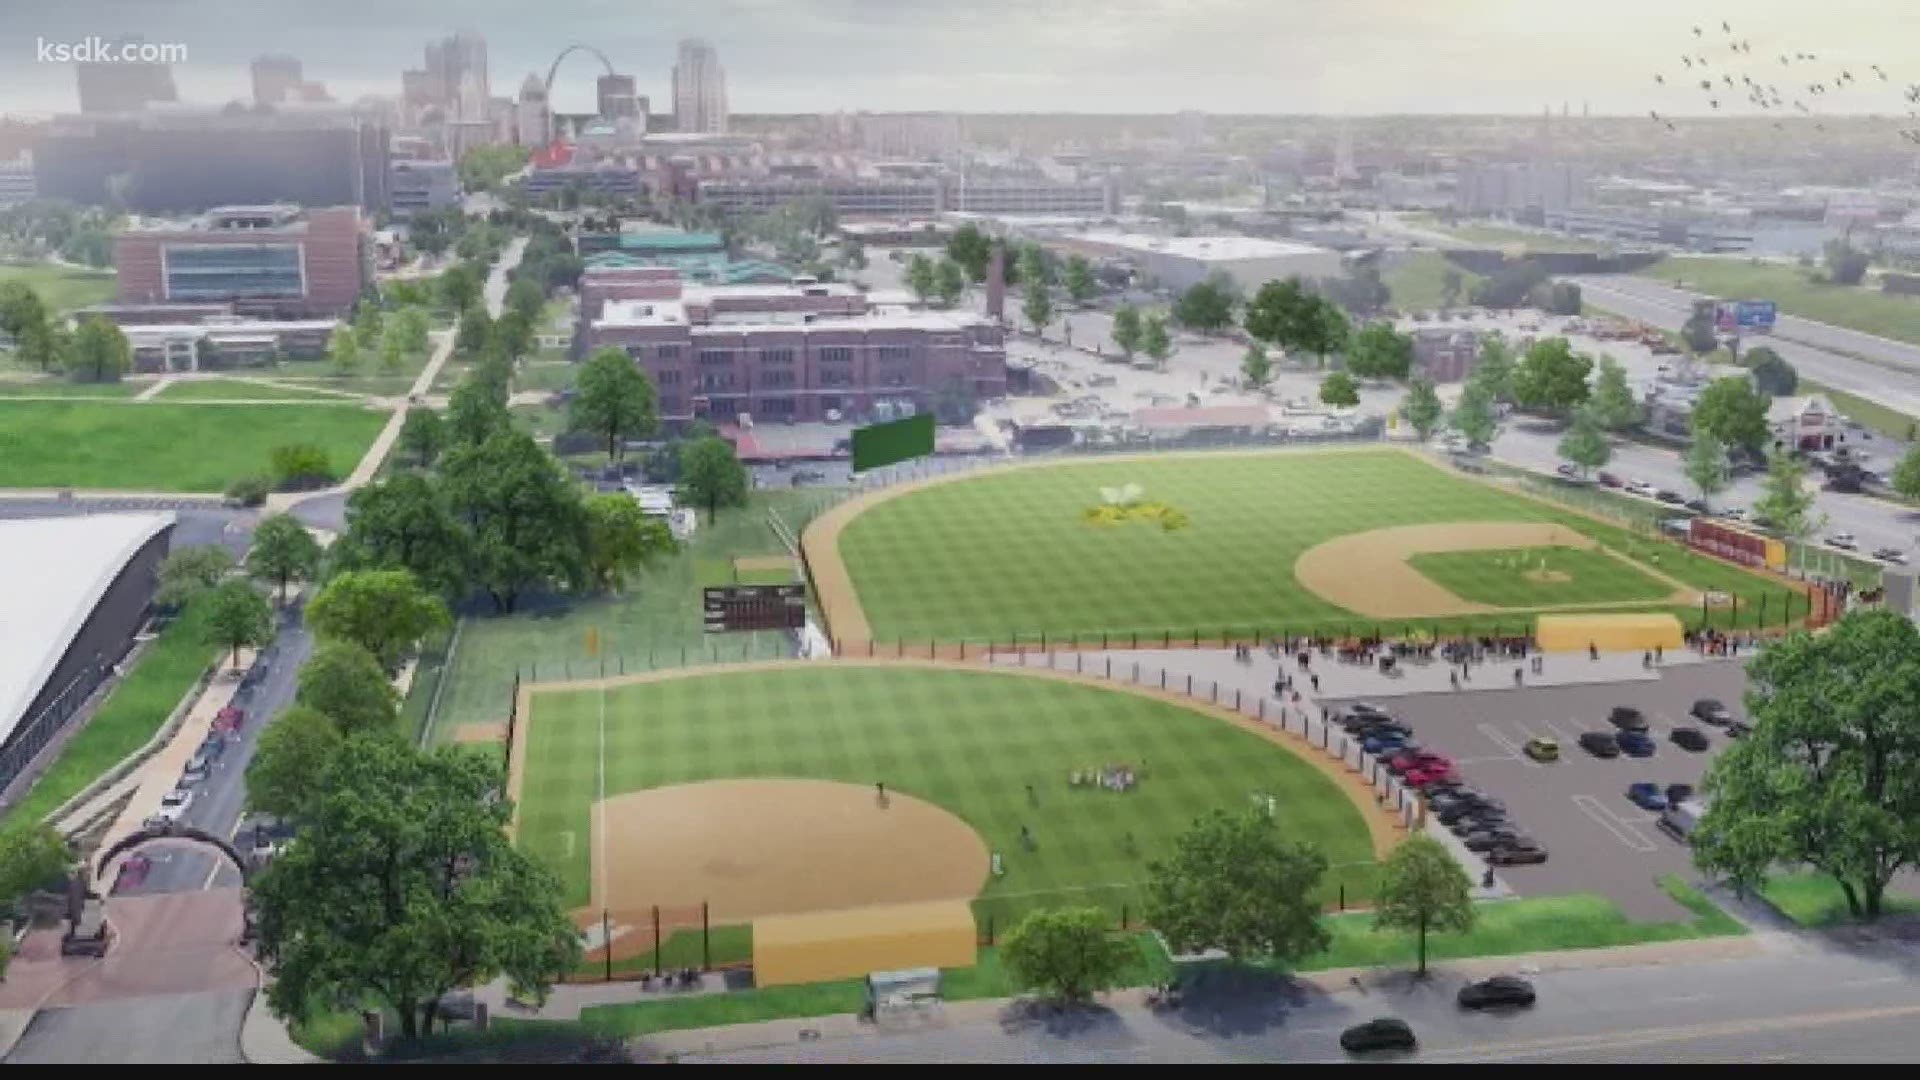 Commercial Real Estate Awards 2022: Stars Park renovation honors St. Louis  Stars of National Negro League - St. Louis Business Journal